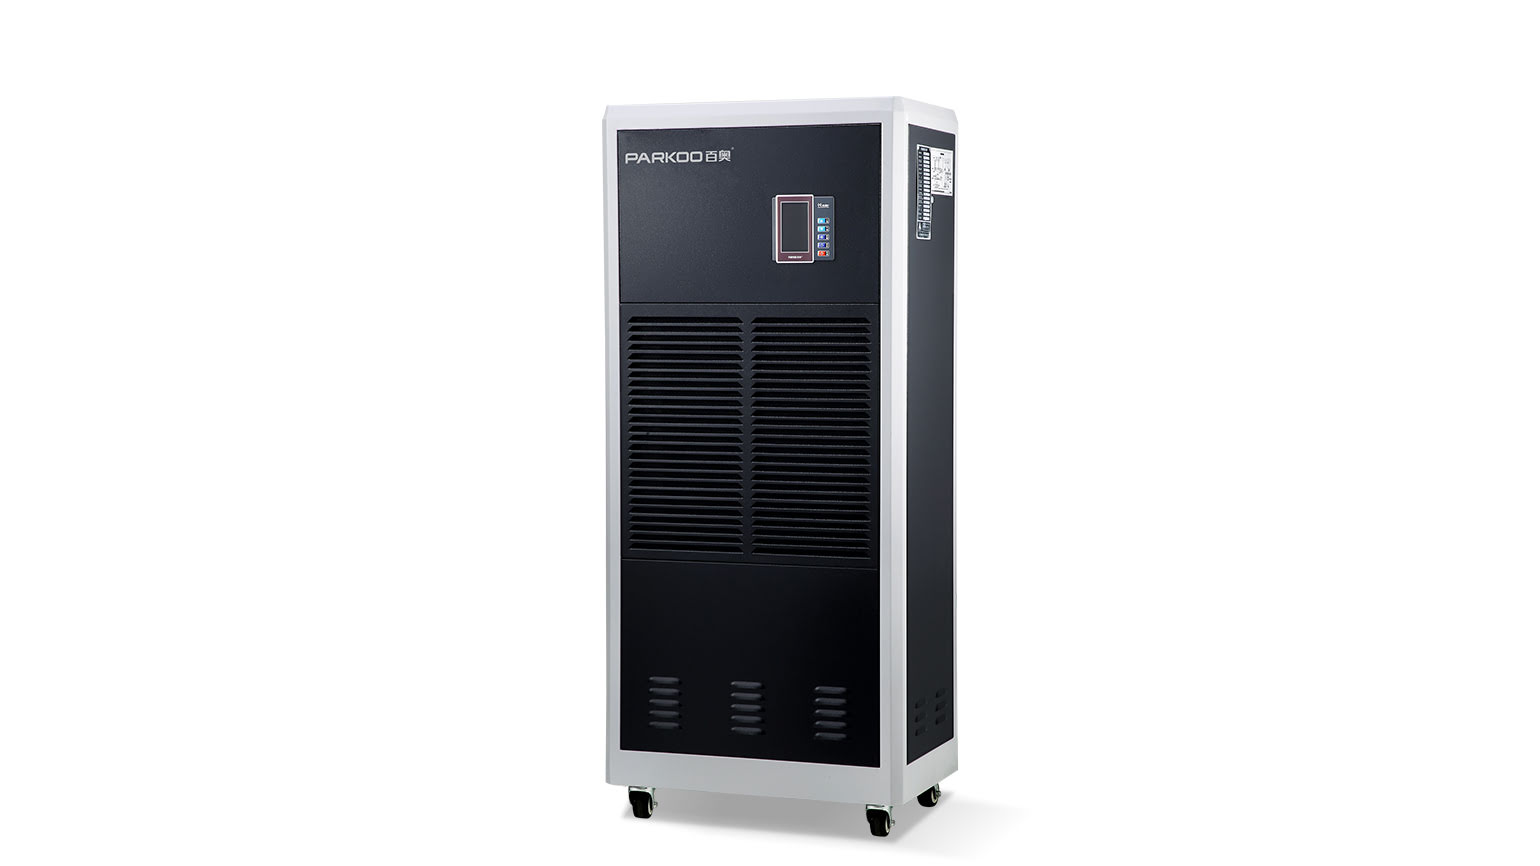 How to choose a constant humidity machine- The manufacturer of the constant humidity machine tells you